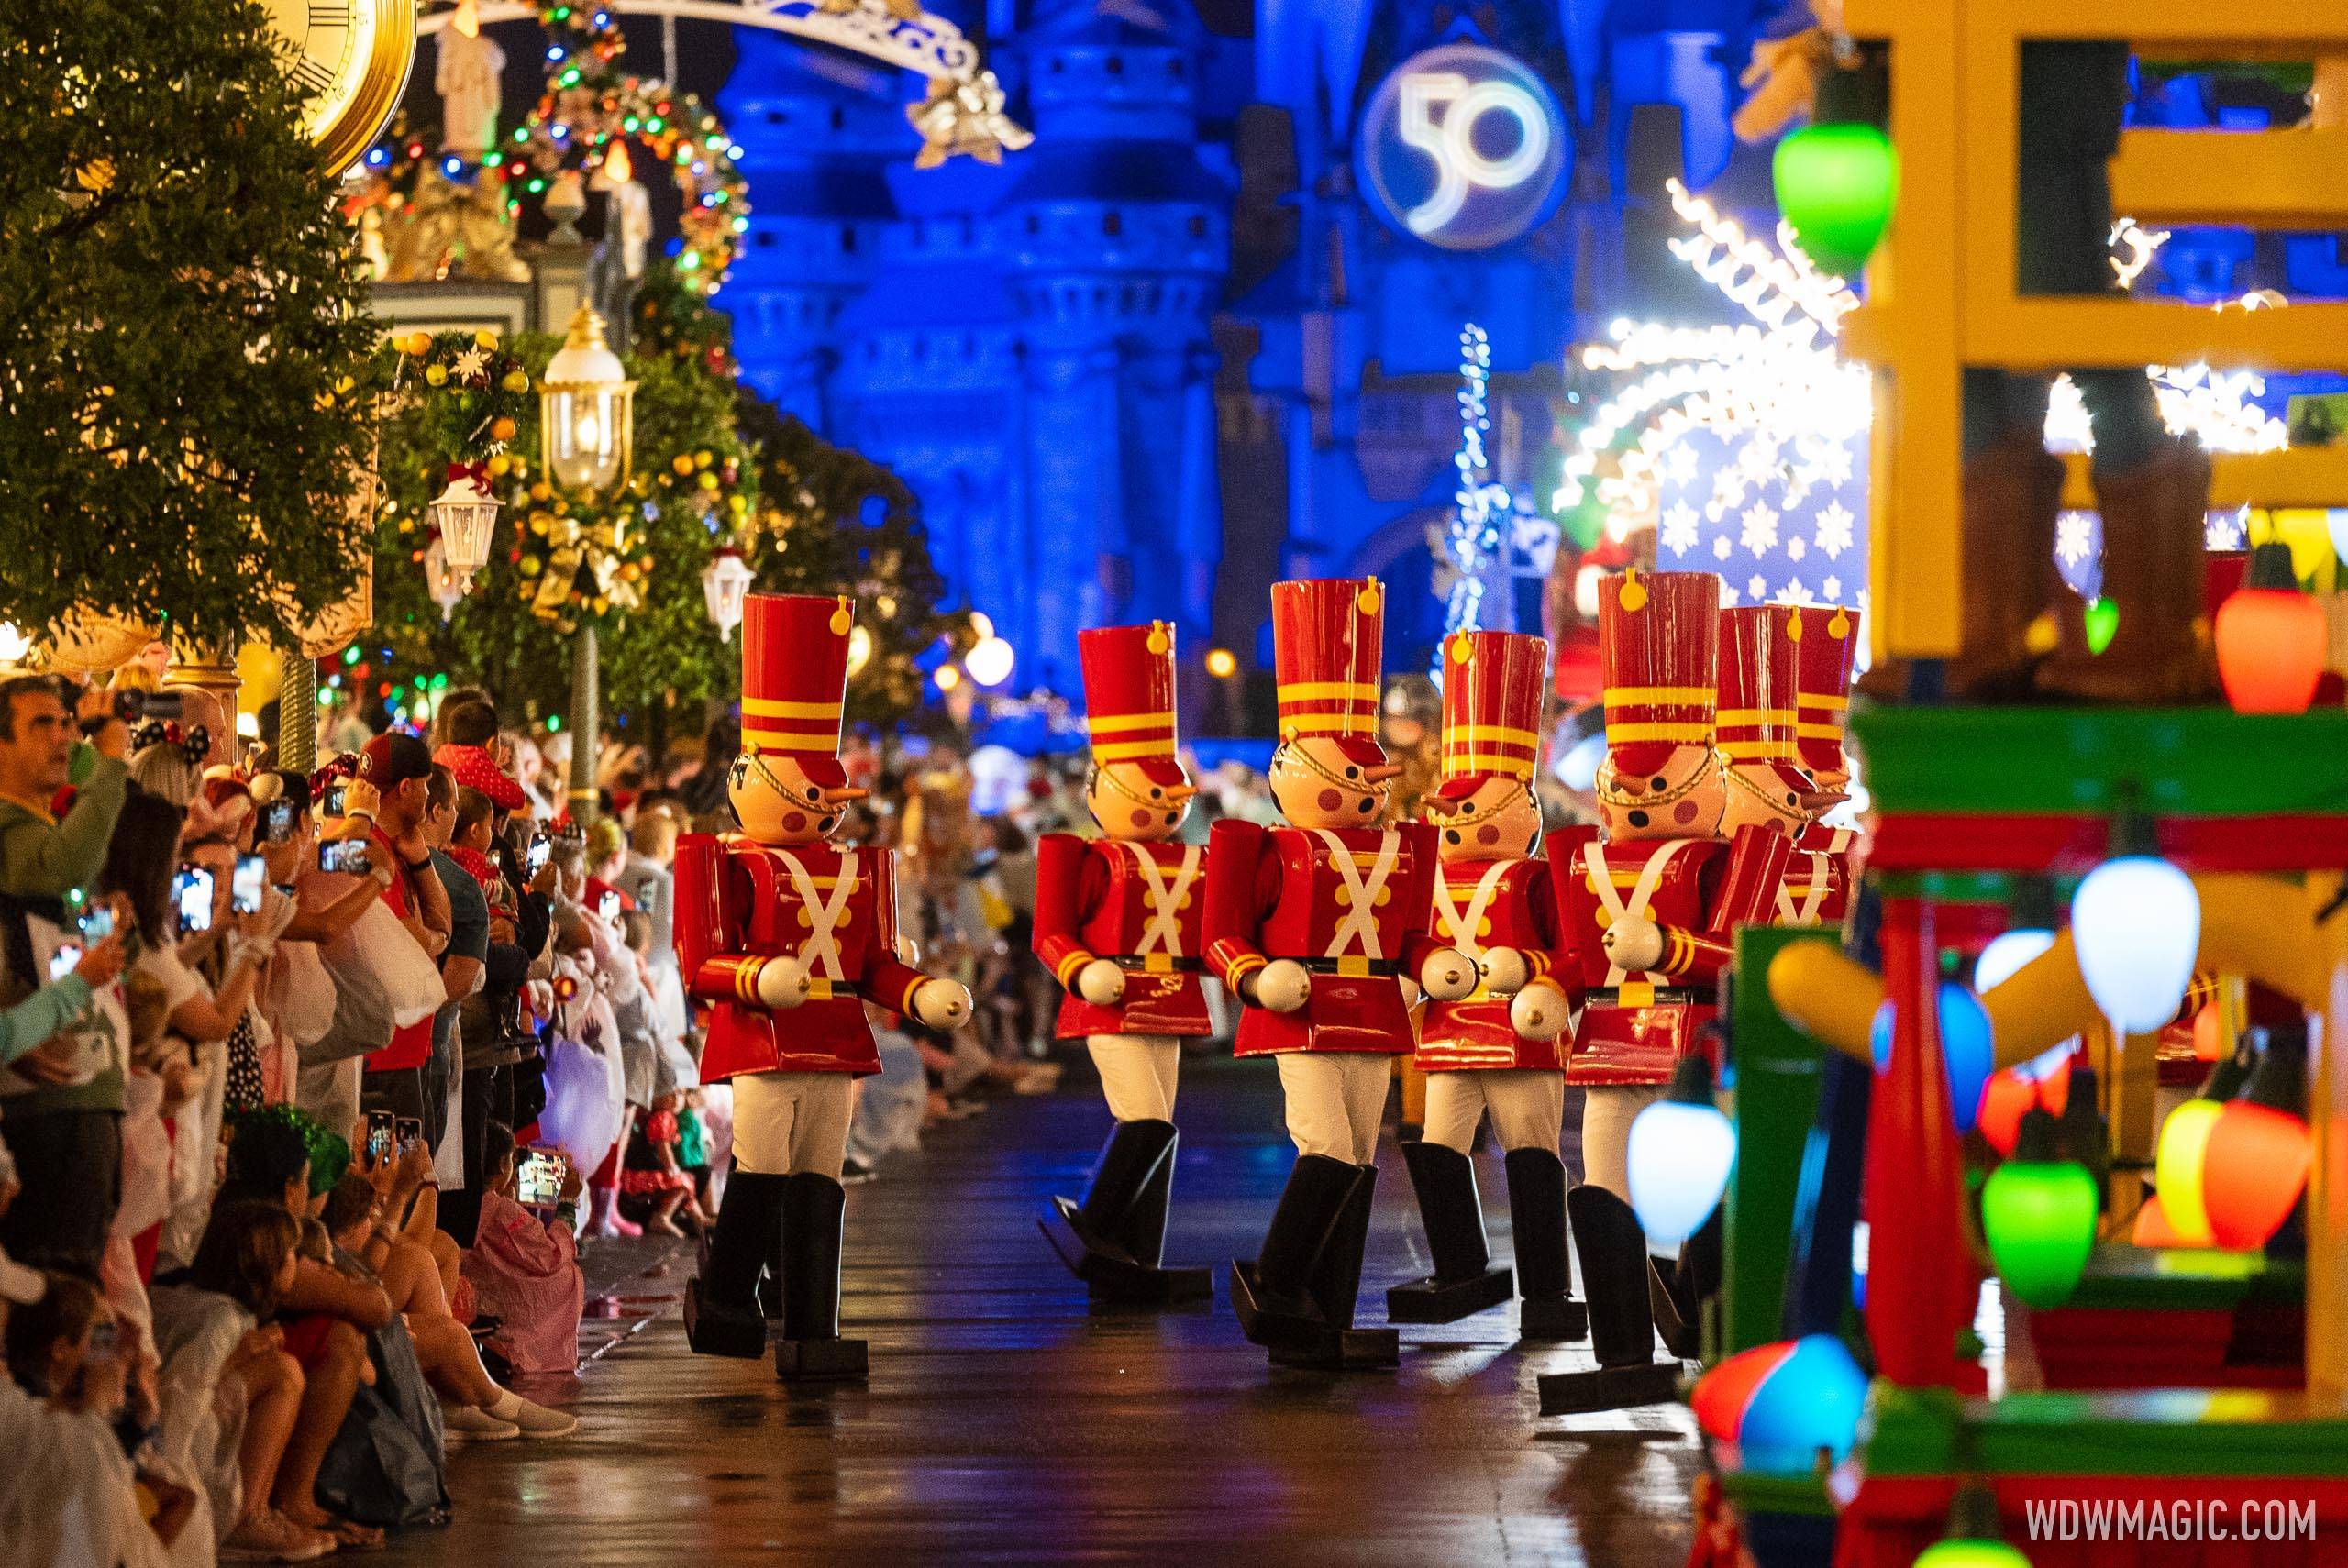 Thursday night's Mickey's Very Merry Christmas Party now sold out